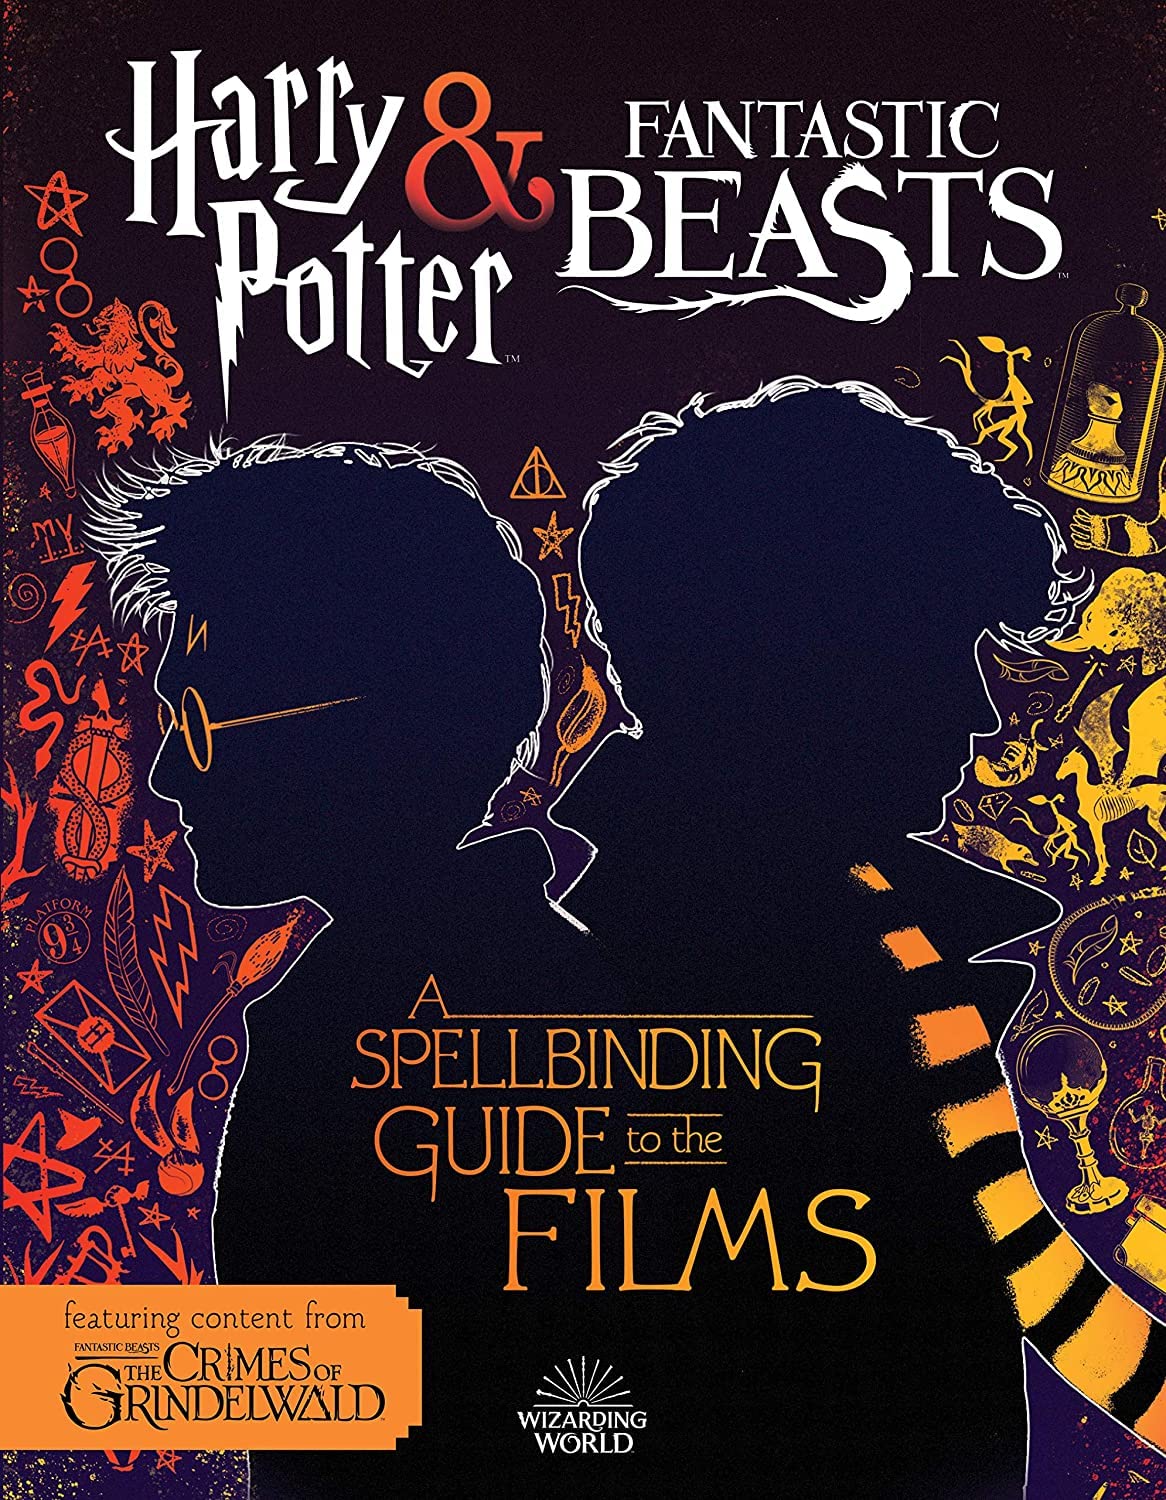 HARRY POTTER & FANTASTIC BEASTS Spellbinding Guide to the Films